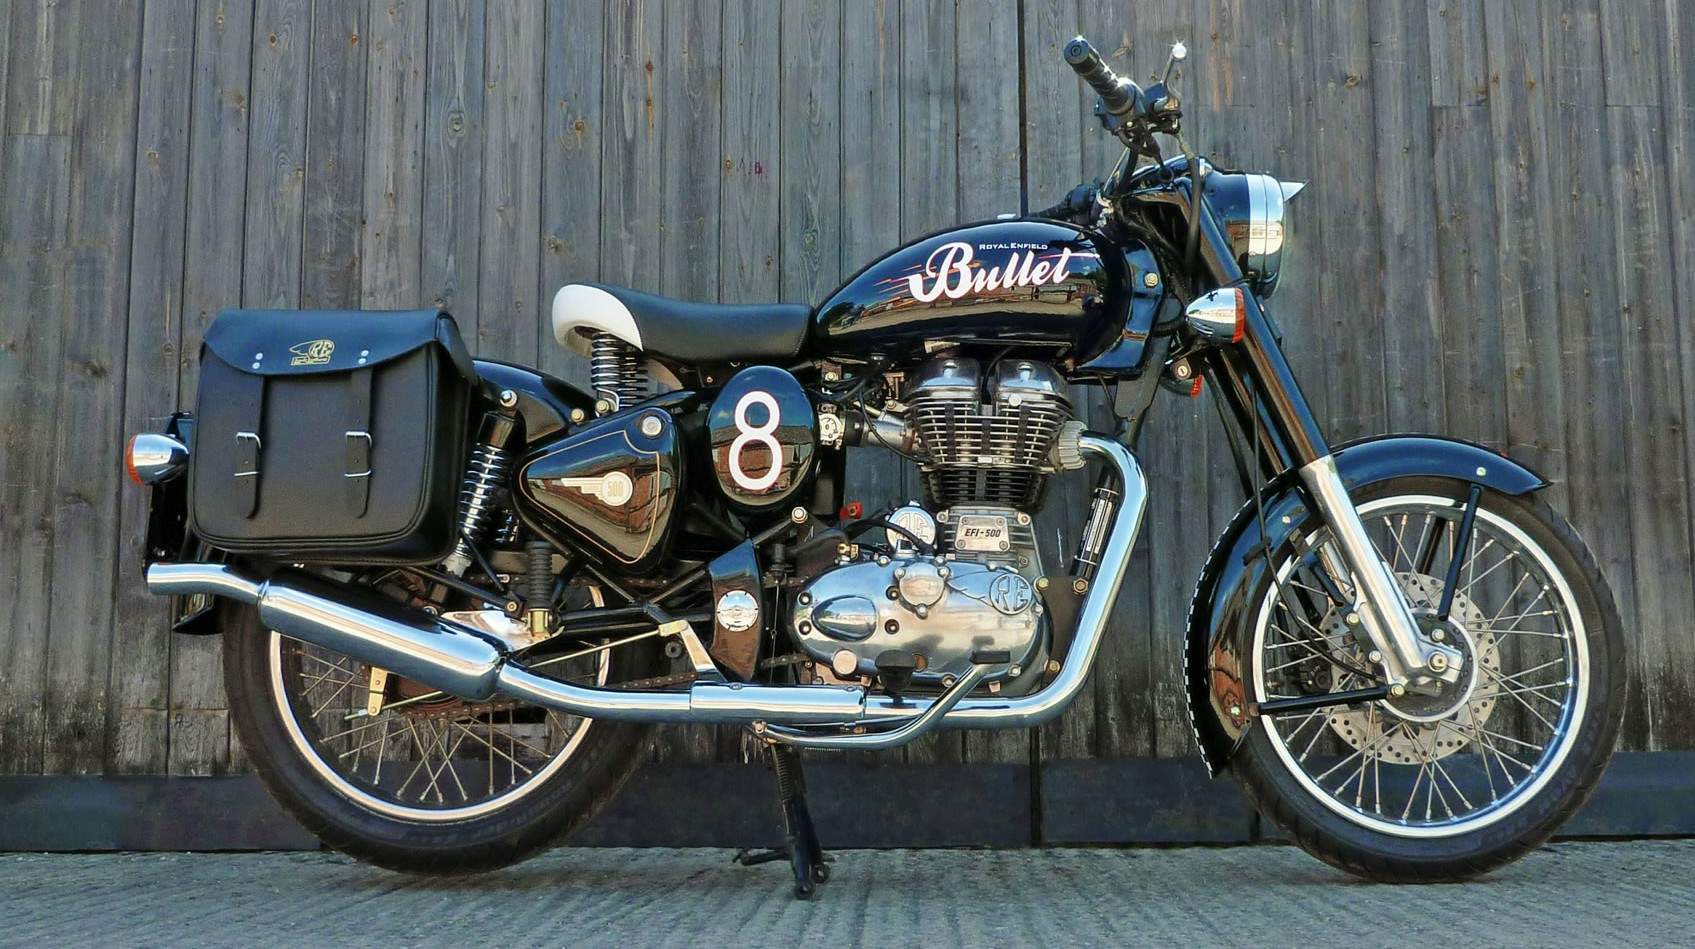 Royal Enfield Bullet Classic 500 Lewis Leathers Limited Edition technical specifications